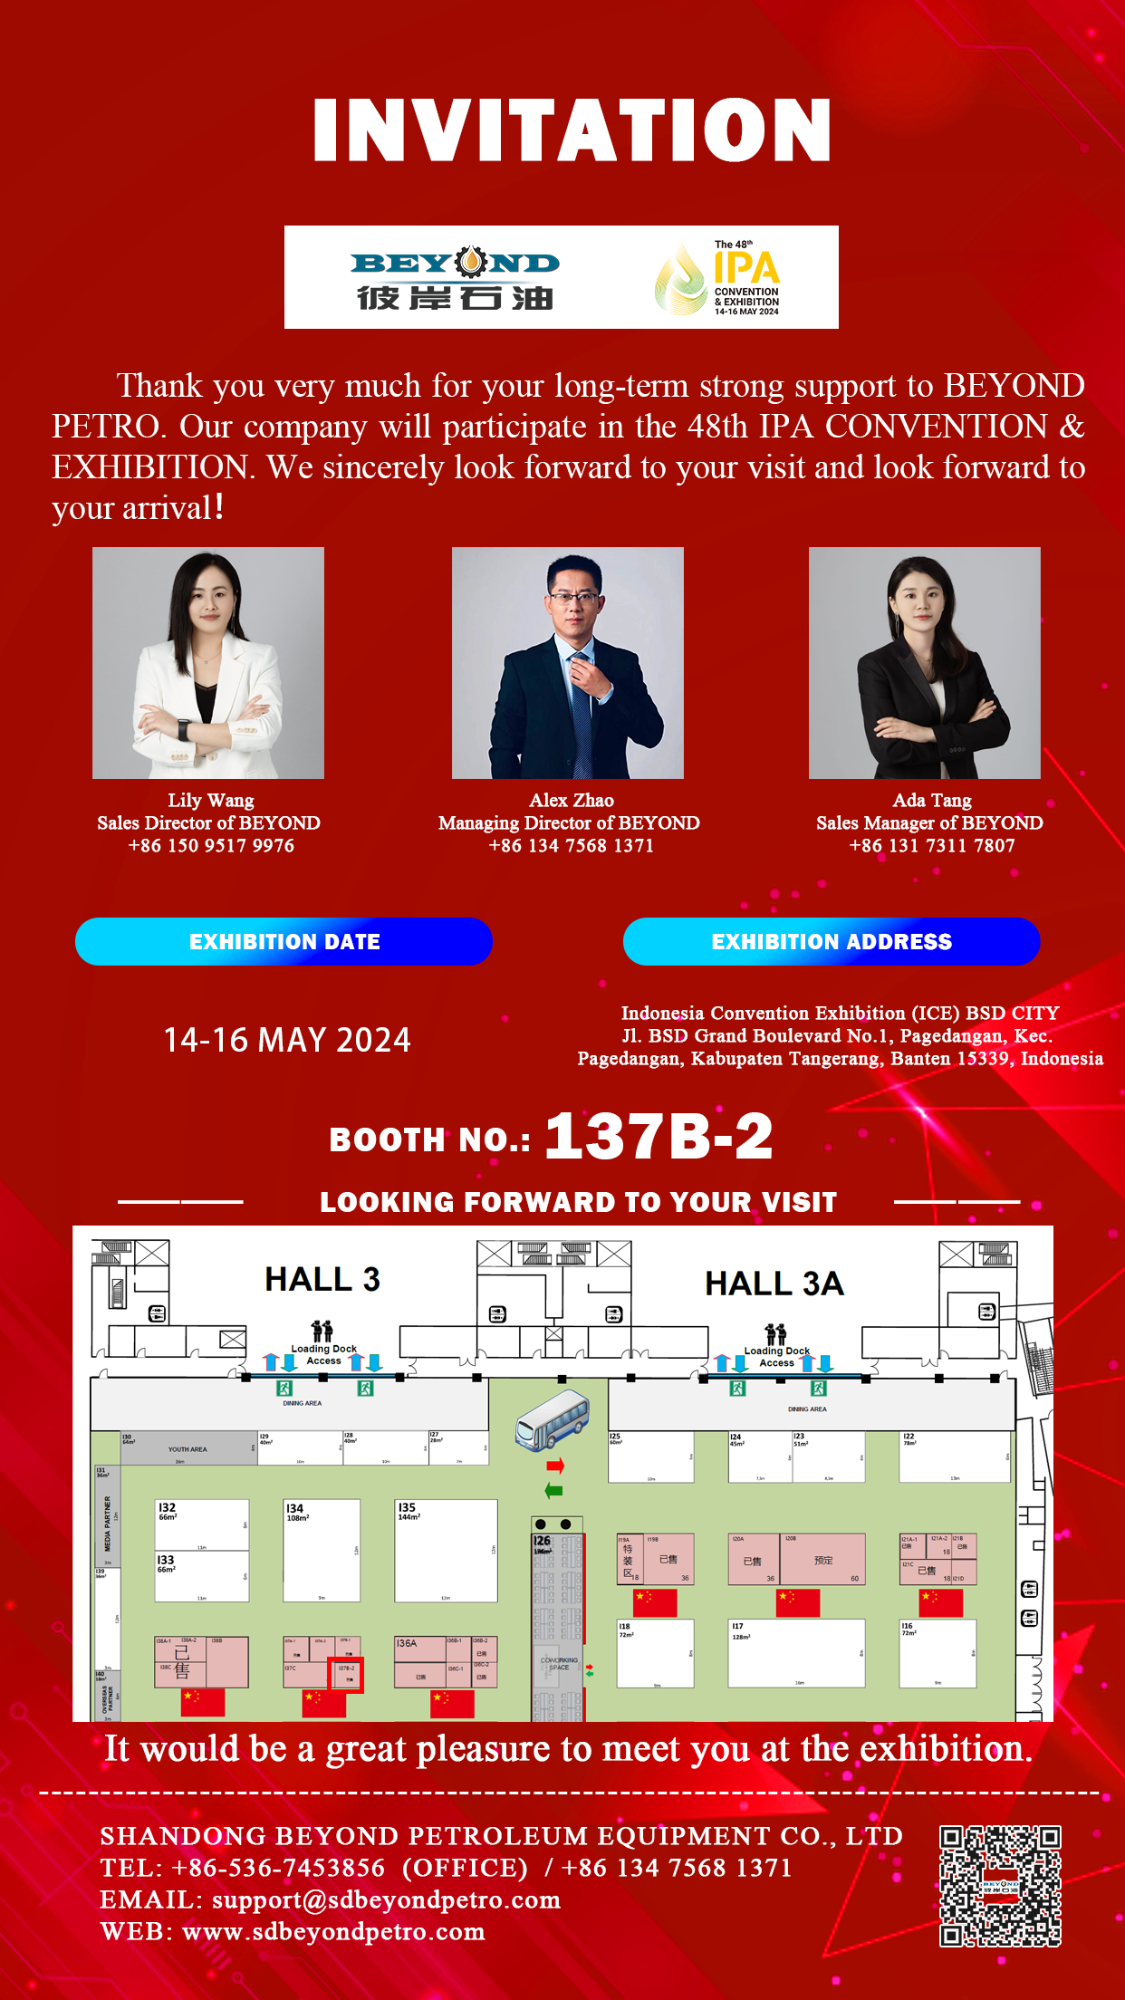 Invite you to meet BEYOND at IPA 2024 in Indonesia